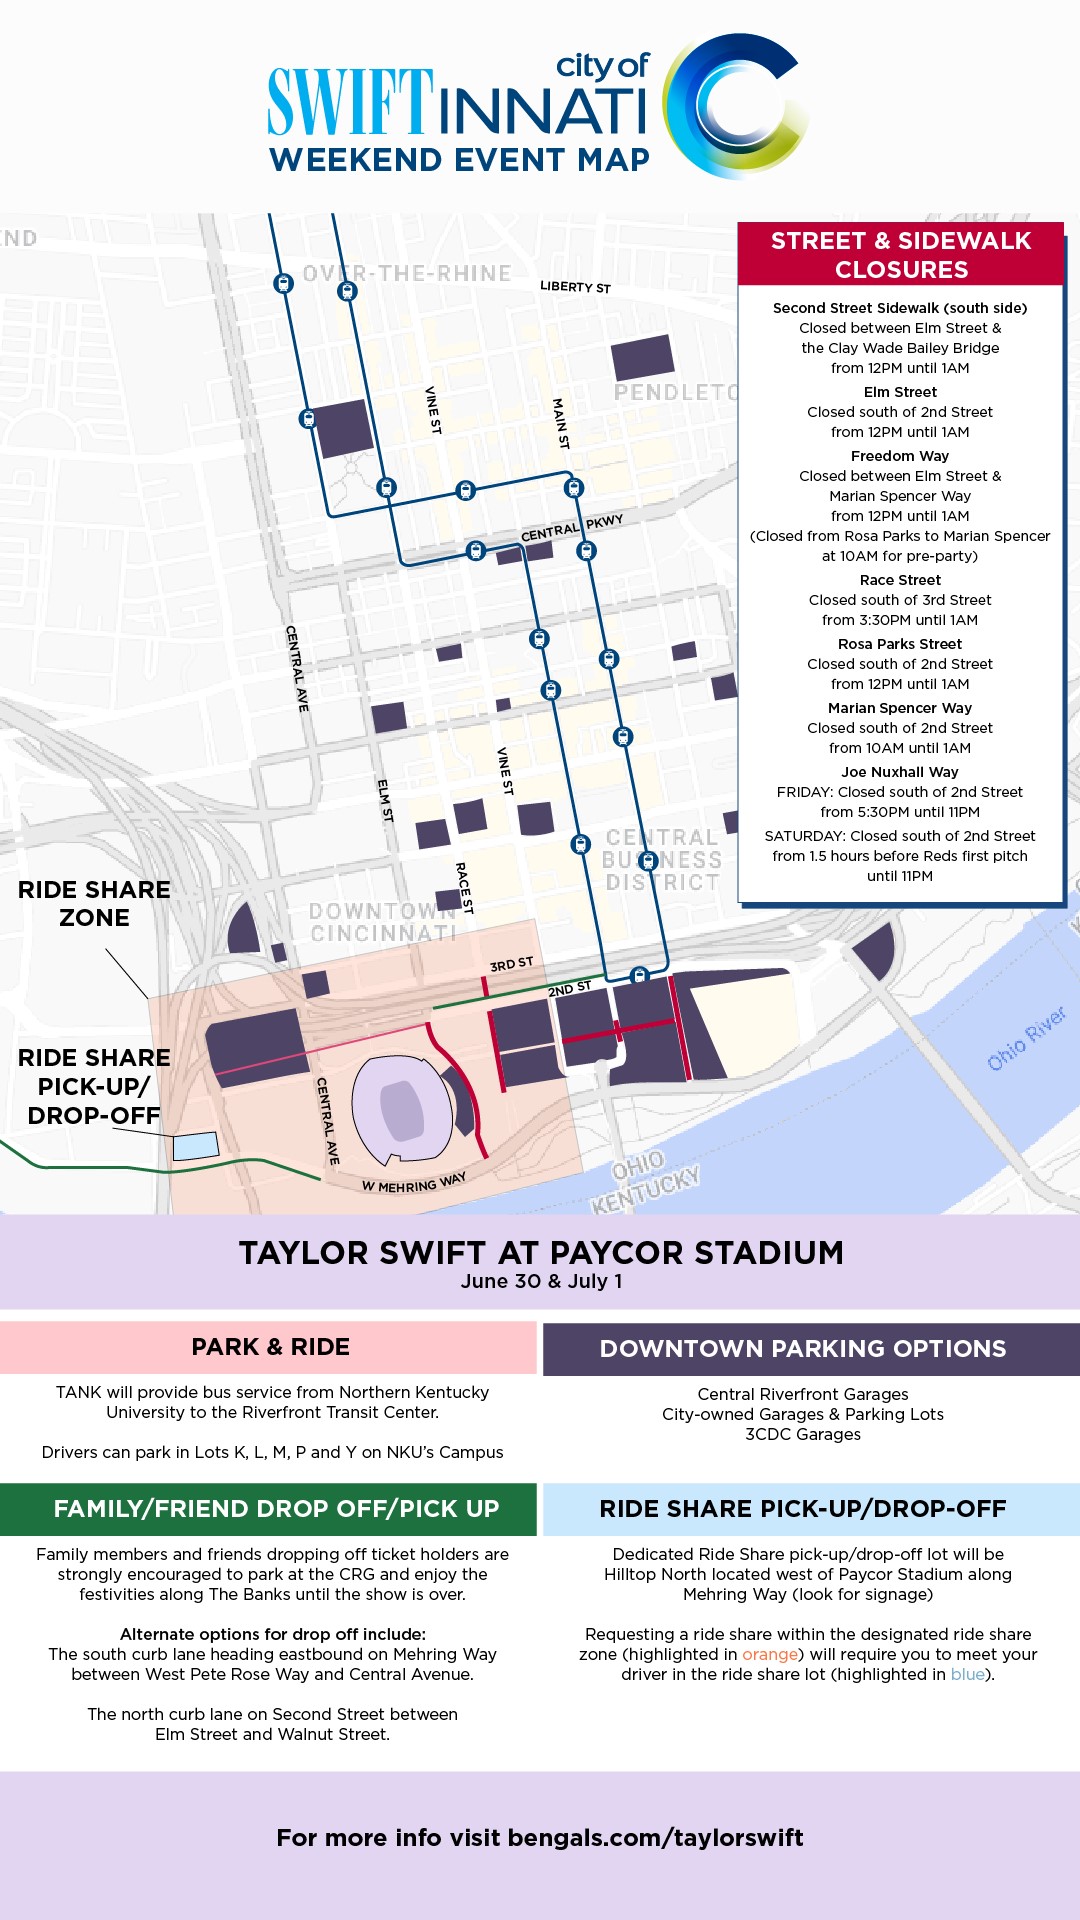 Bag Policy for the Taylor Swift Eras Tour in Cincinnati – Q102 101.9 WKRQ-FM